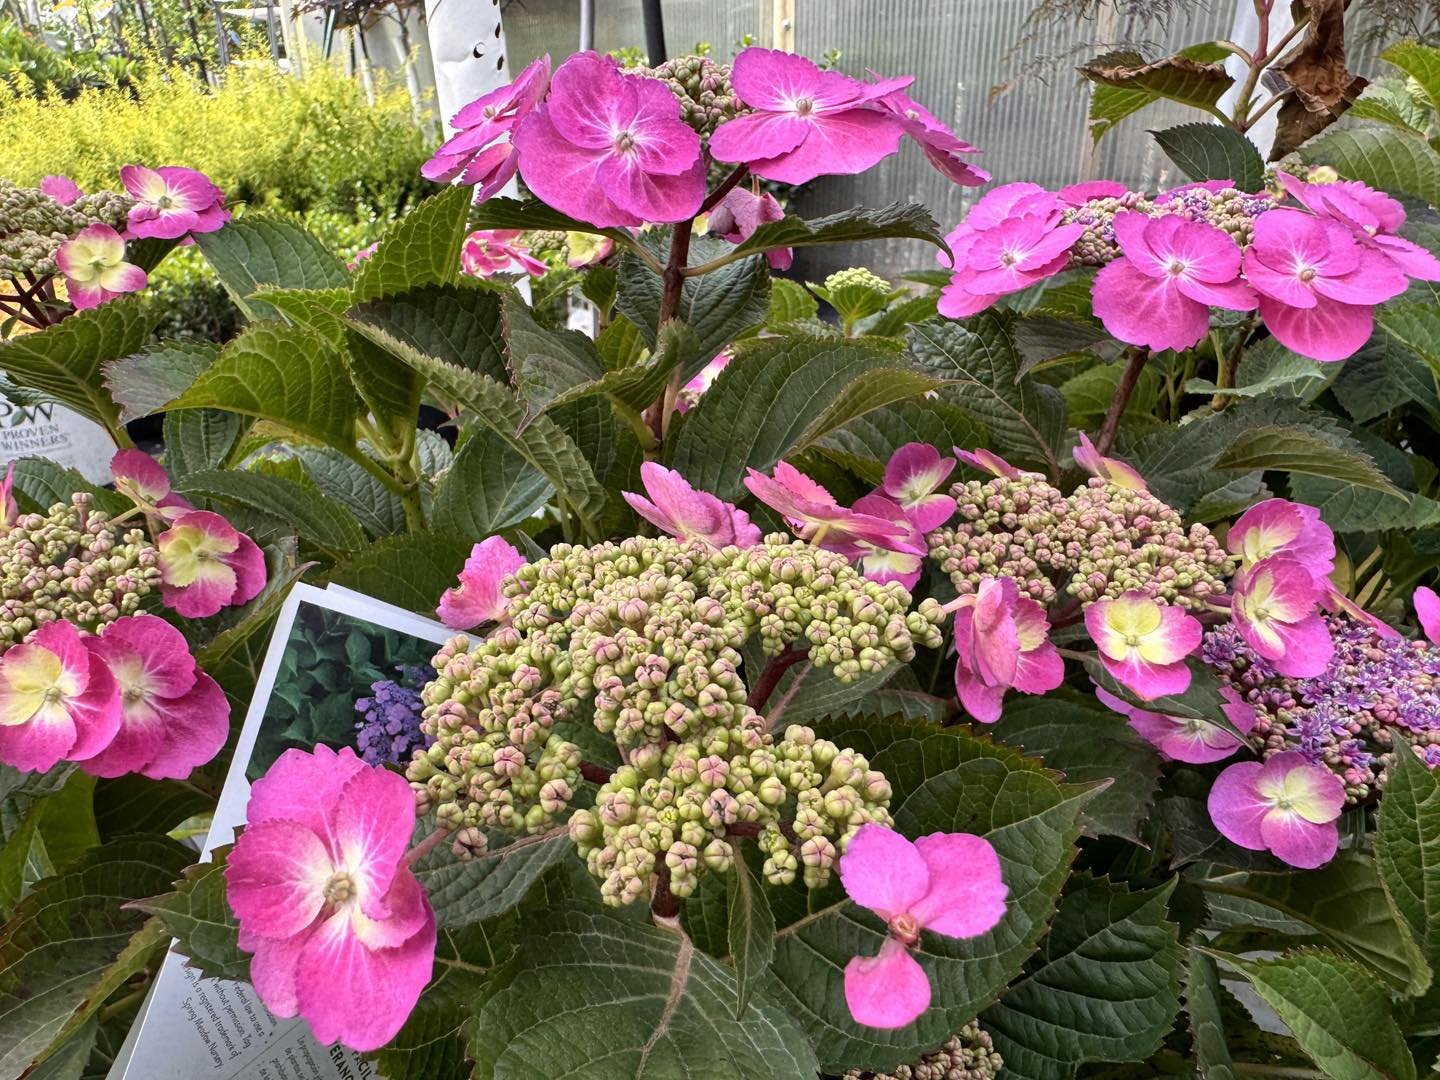 I found this stunning hydrangea for the pollinator garden at Ogle's Greenhouse the other day. It&rsquo;s from Proven Winners ColorChoice Flowering Shrubs called TUFF STUFF&trade; Reblooming Mountain Hydrangea that can handle full sun and stays relati